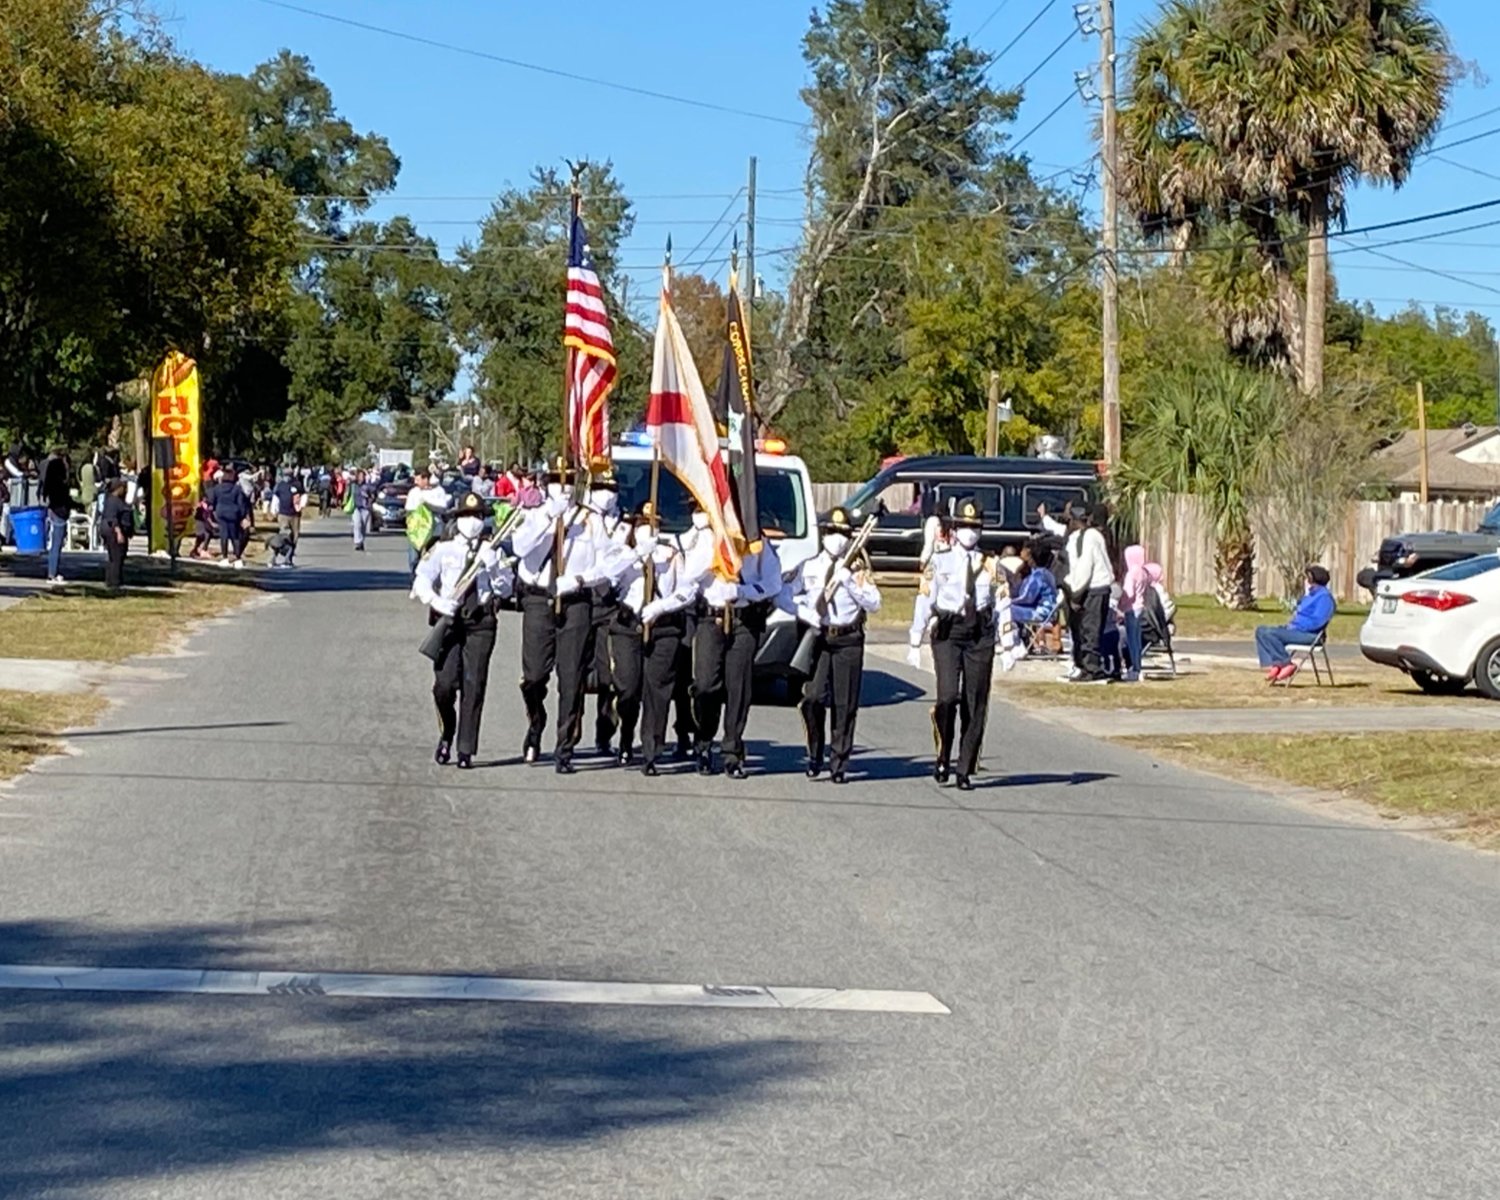 Monday's parade honors the life of Dr. Martin Luther King Jr. and makes